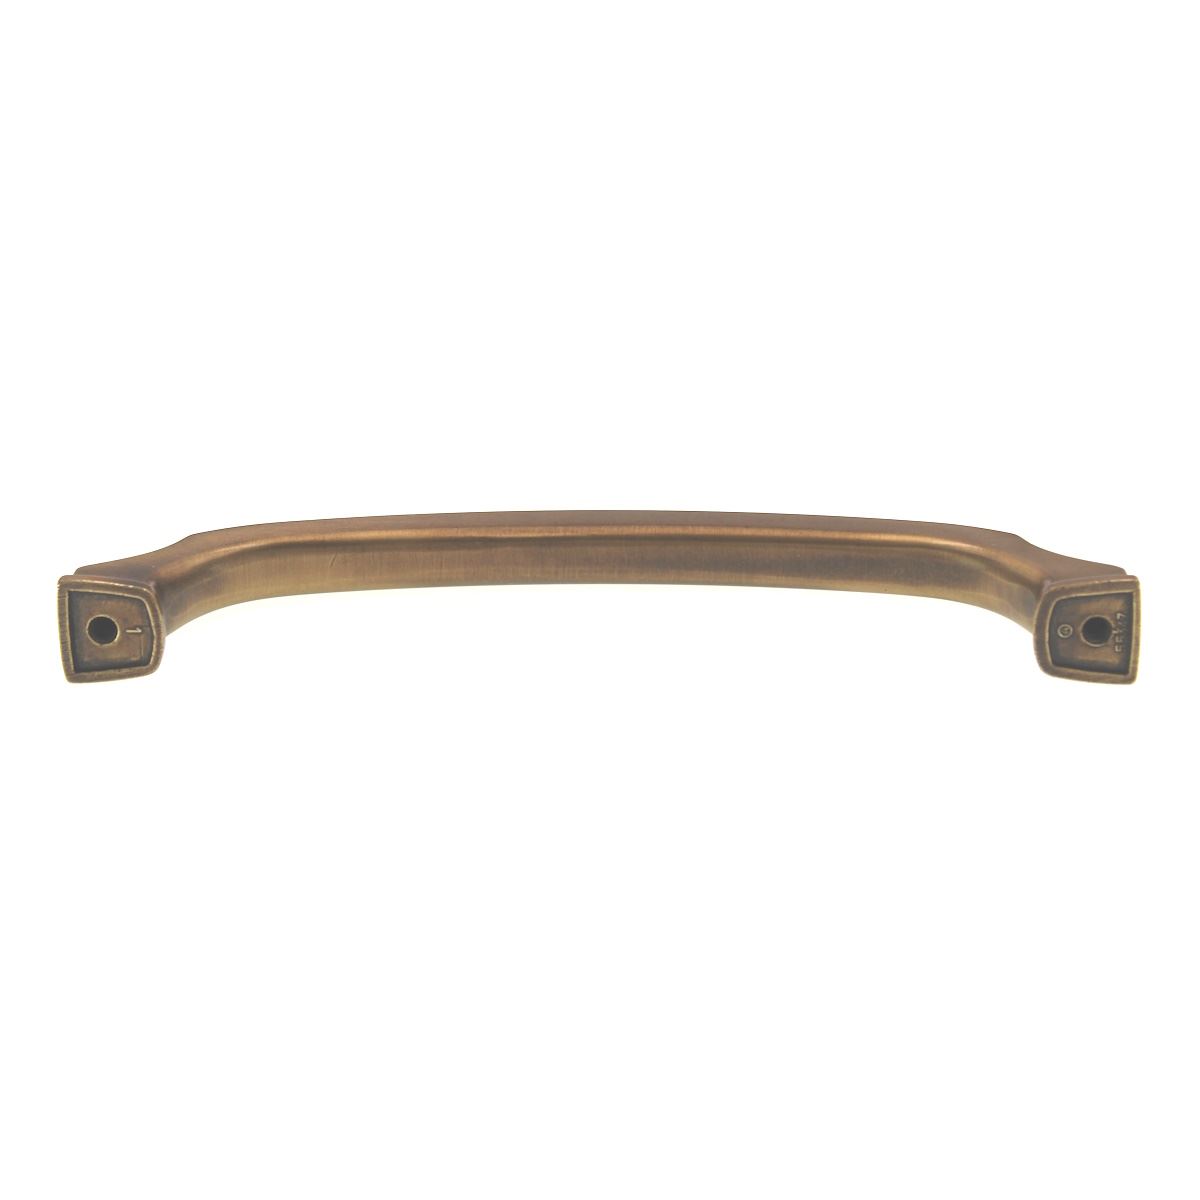 Amerock Revitalize 6 1/4" (160mm) Ctr Cabinet Arch Pull Gilded Bronze BP55347GB